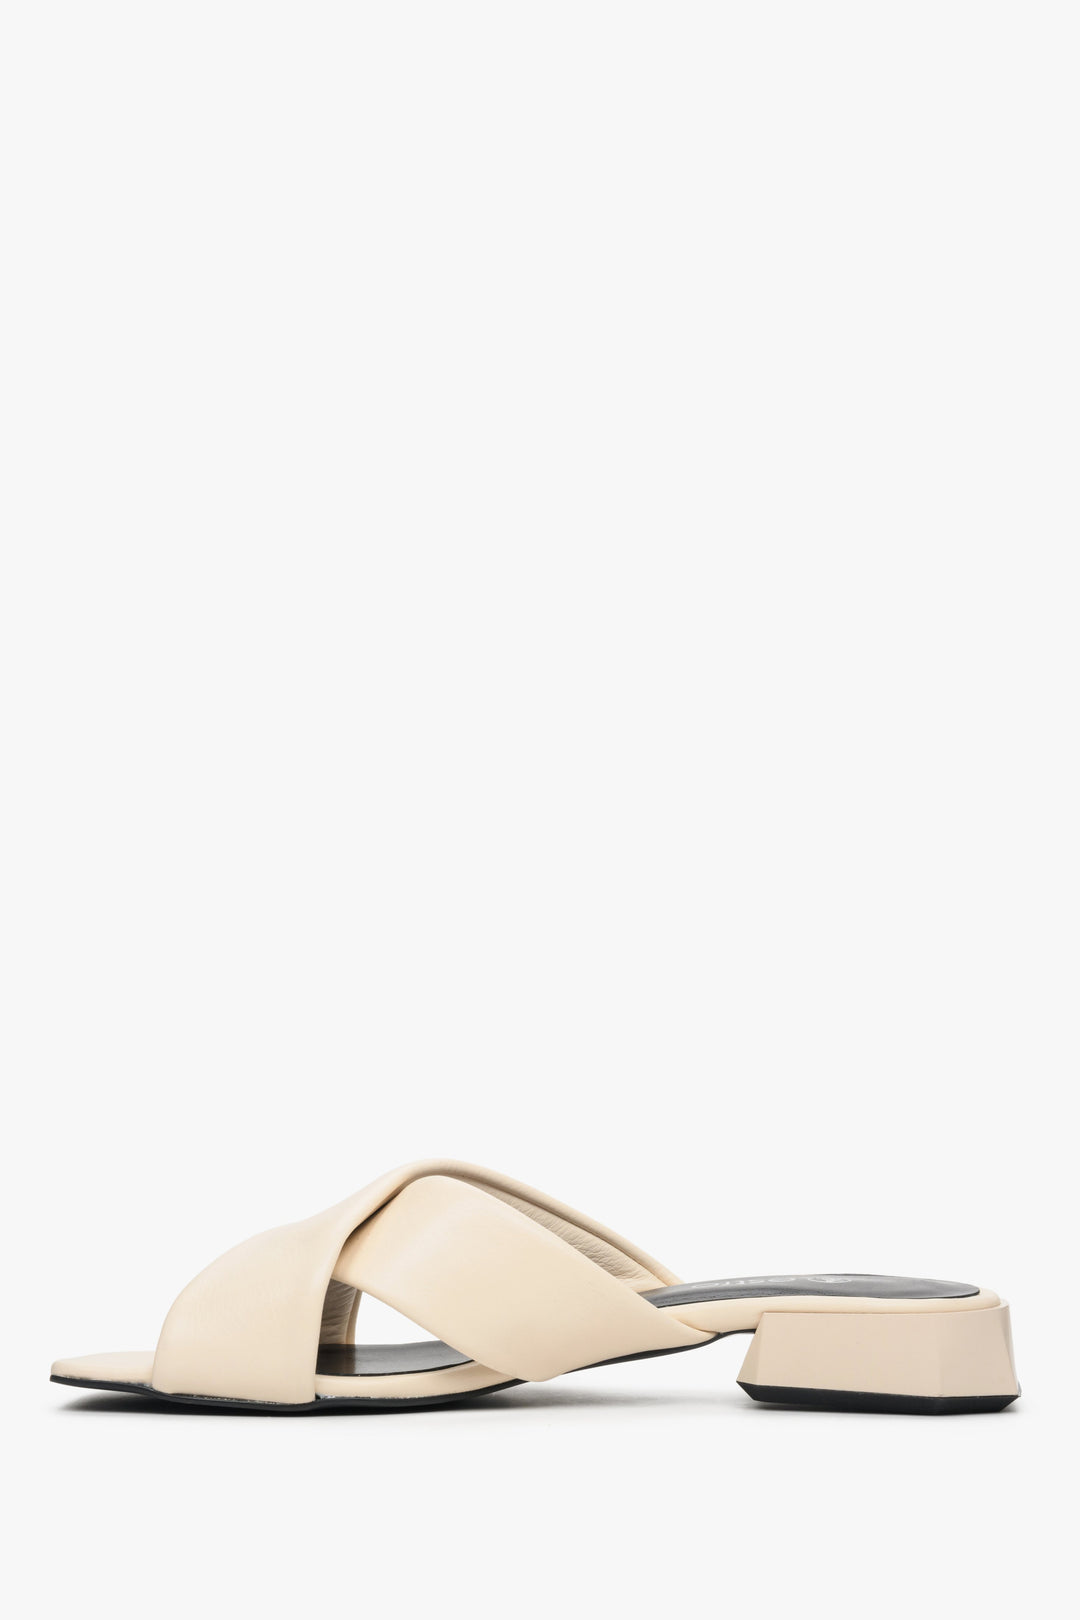 Women's cross-strap mules in beige of Estro brand made of natural, Italian leather.